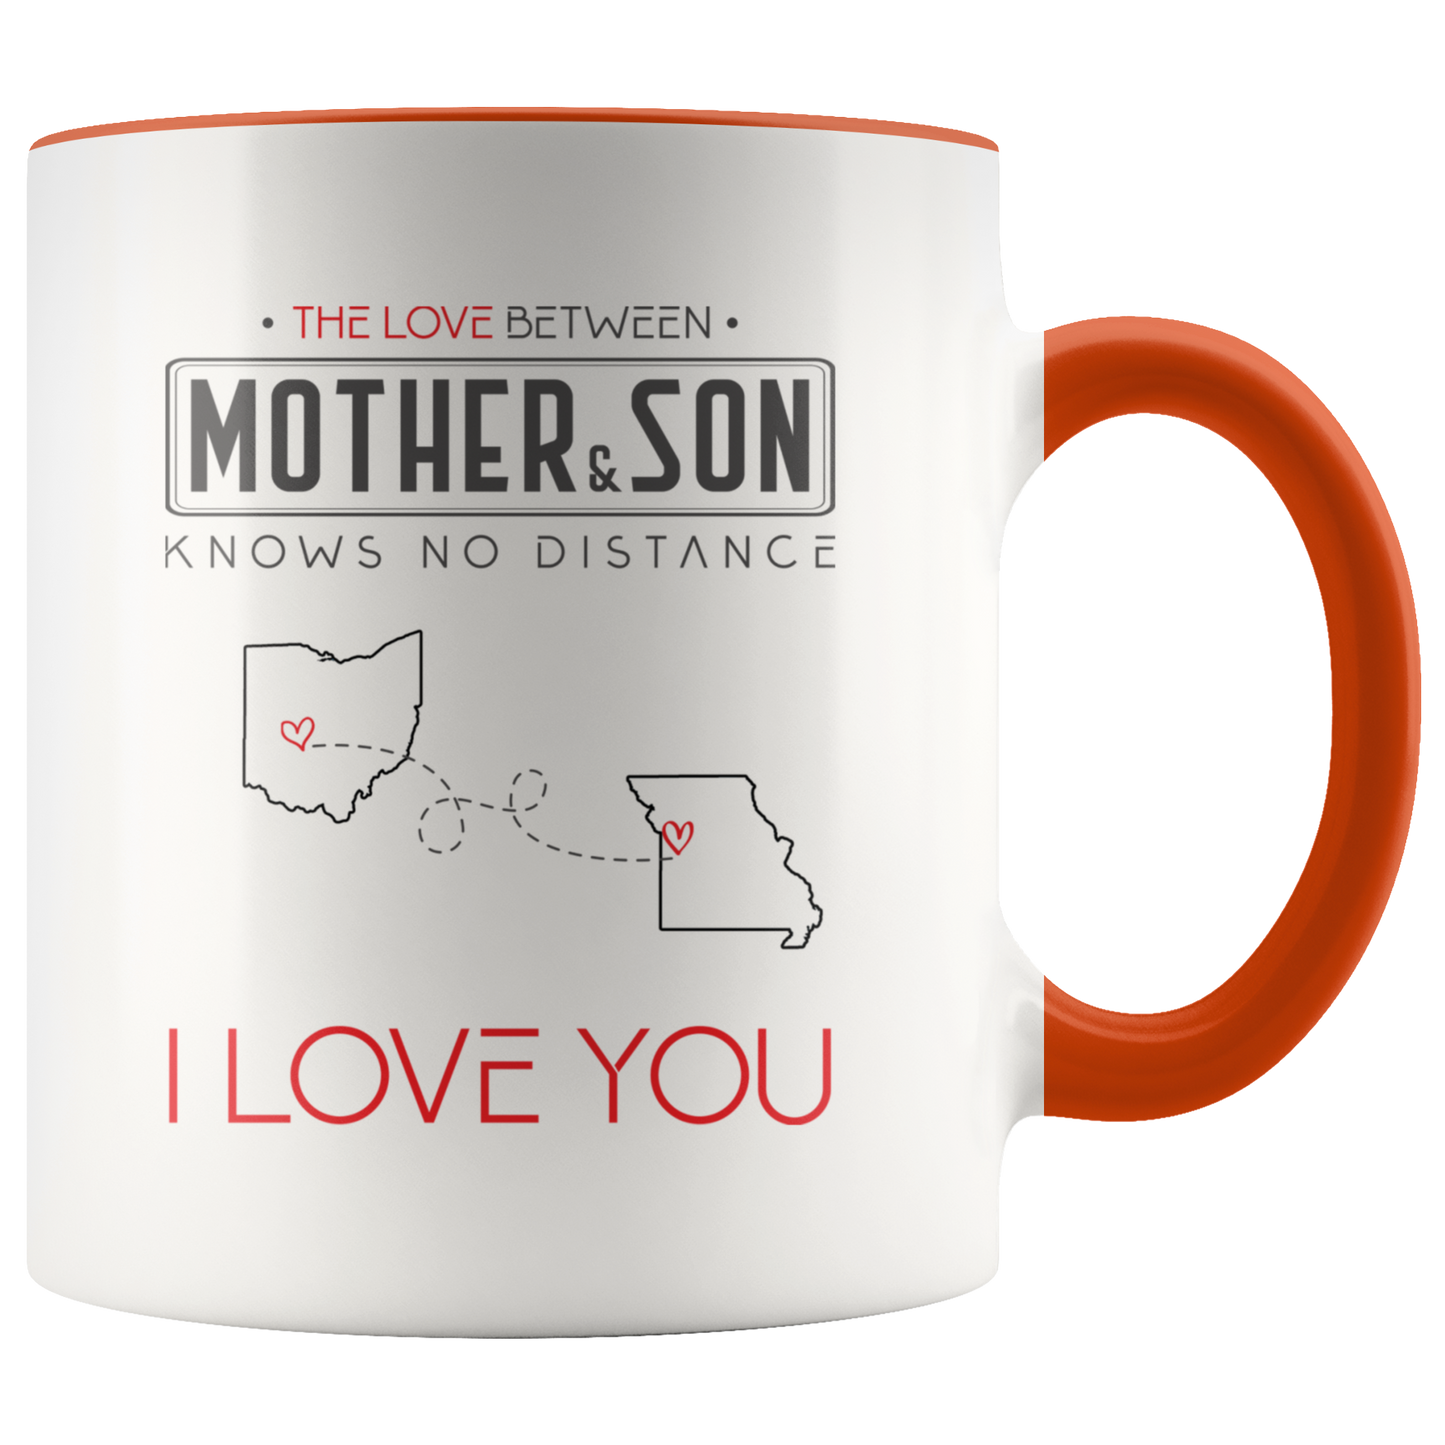 ND-21315656-sp-23390 - Mom And Son Accent Mug 11 oz Red - The Love Between Mother A